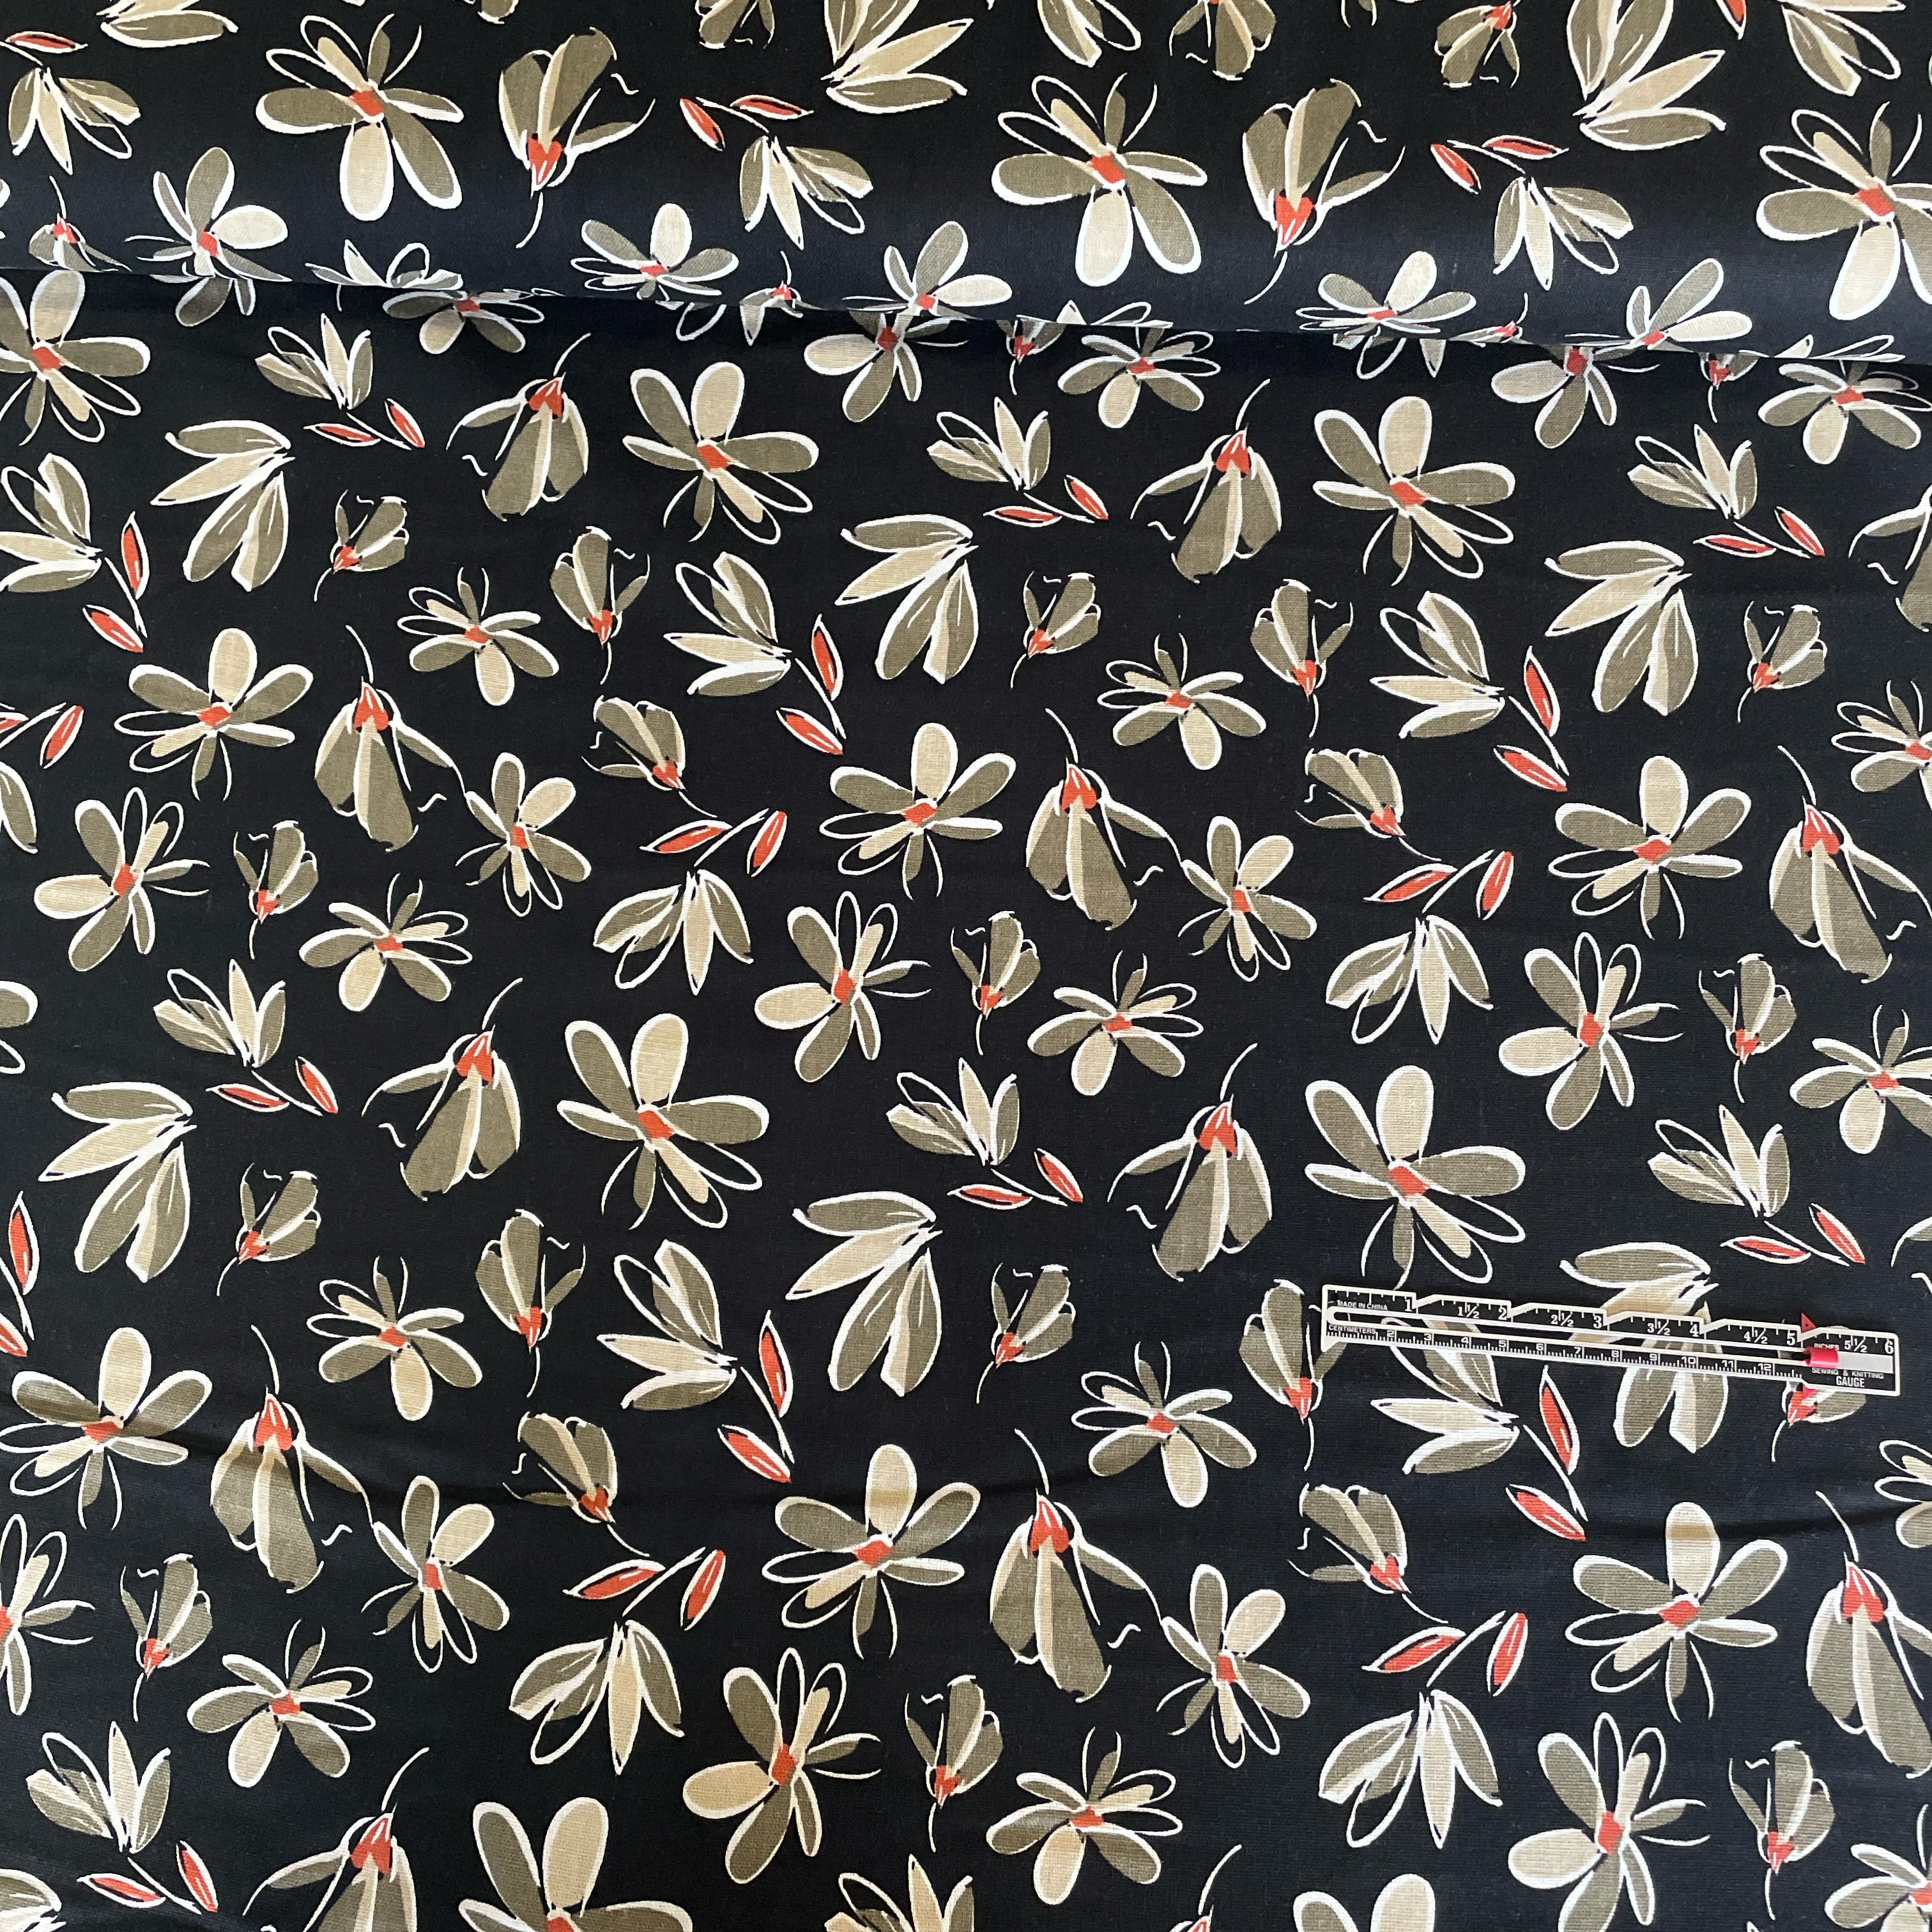 This fabric is a beautiful combination of linen, washed viscose, and black floral print. The linen provides a natural and breathable quality to the fabric, while the washed viscose adds a luxurious and soft touch. The black floral print adds a touch of elegance and femininity to the fabric.